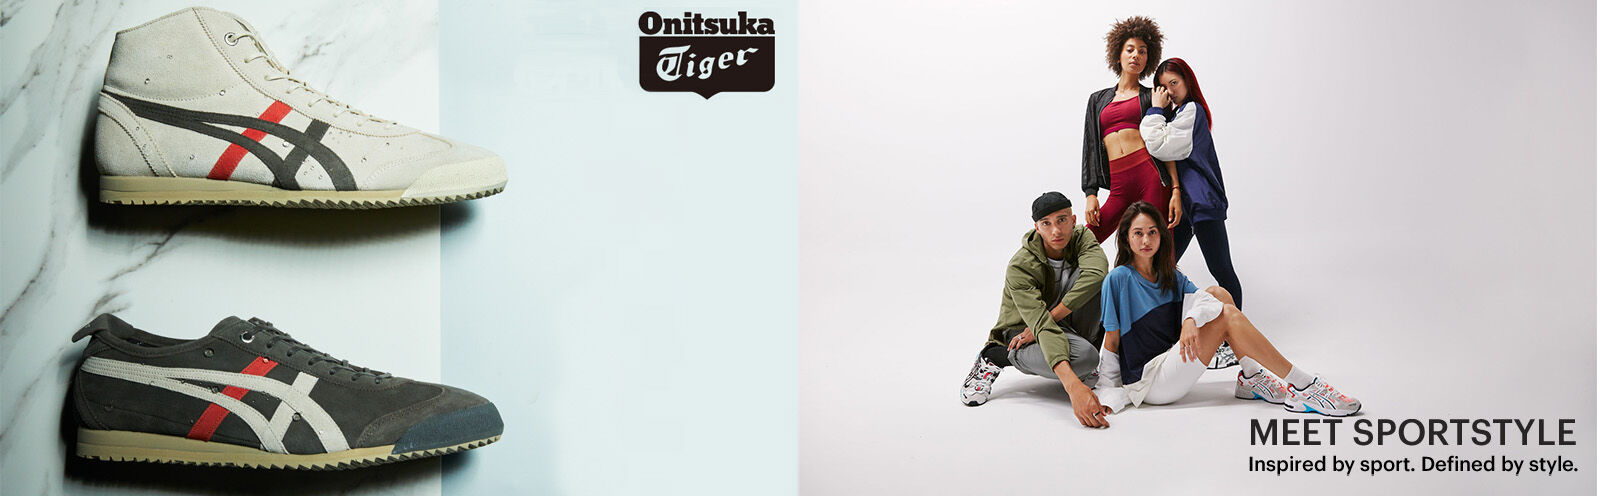 Asics And Onitsuka Tiger Difference Hotsell, SAVE 54% - transocean.lt